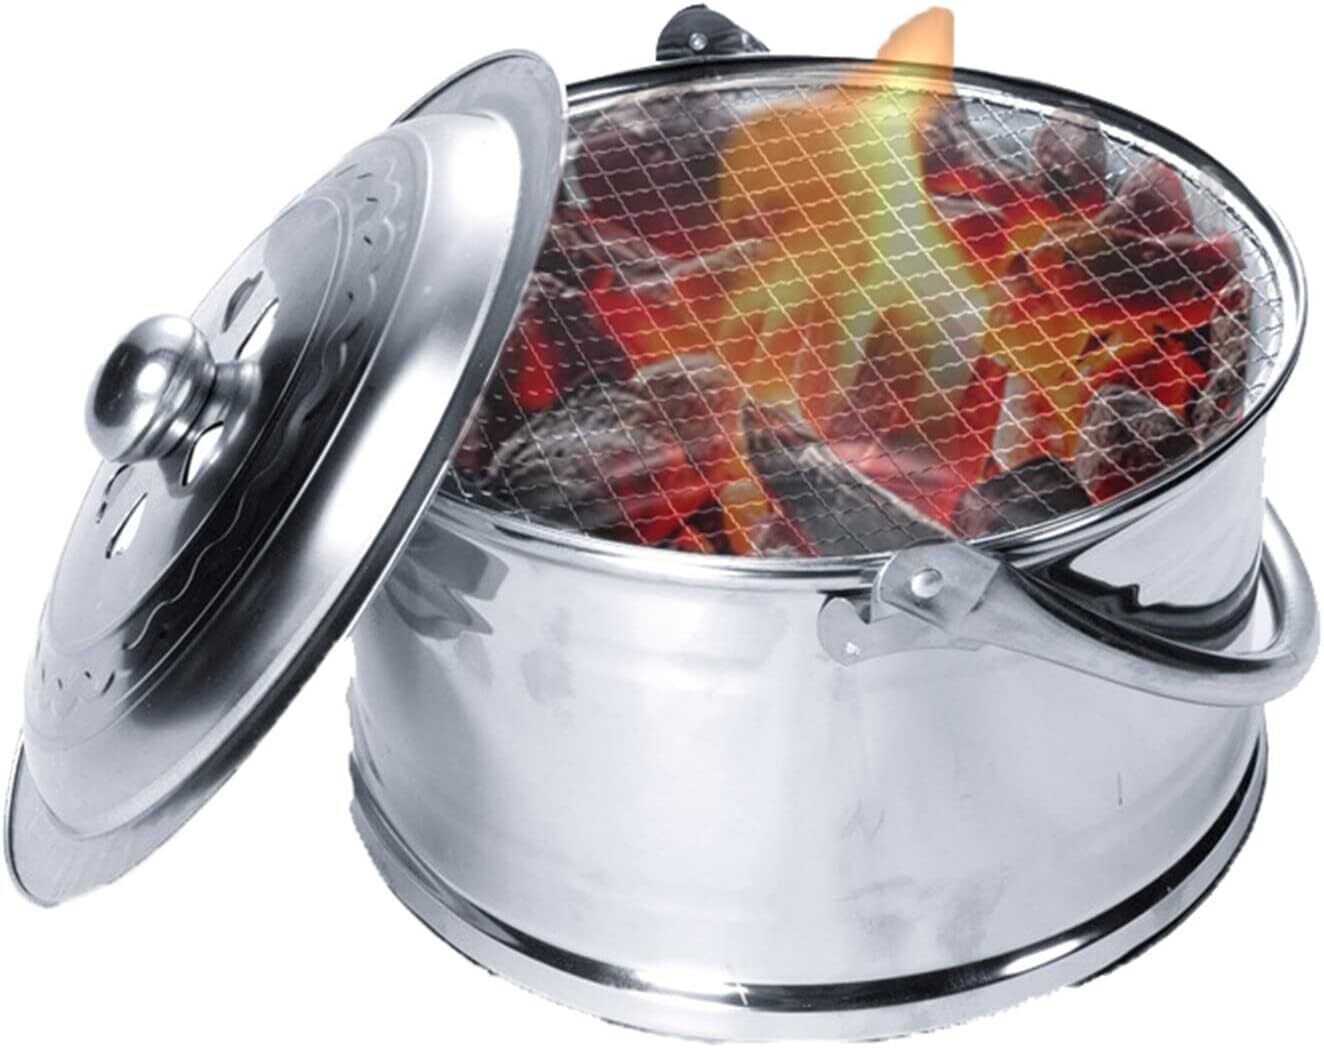 Stainless Steel Brazier Portable Smokeless Fire Pit for Patio - Wood Heater - Charcoal Heater - Indoor and Outdoor Heating